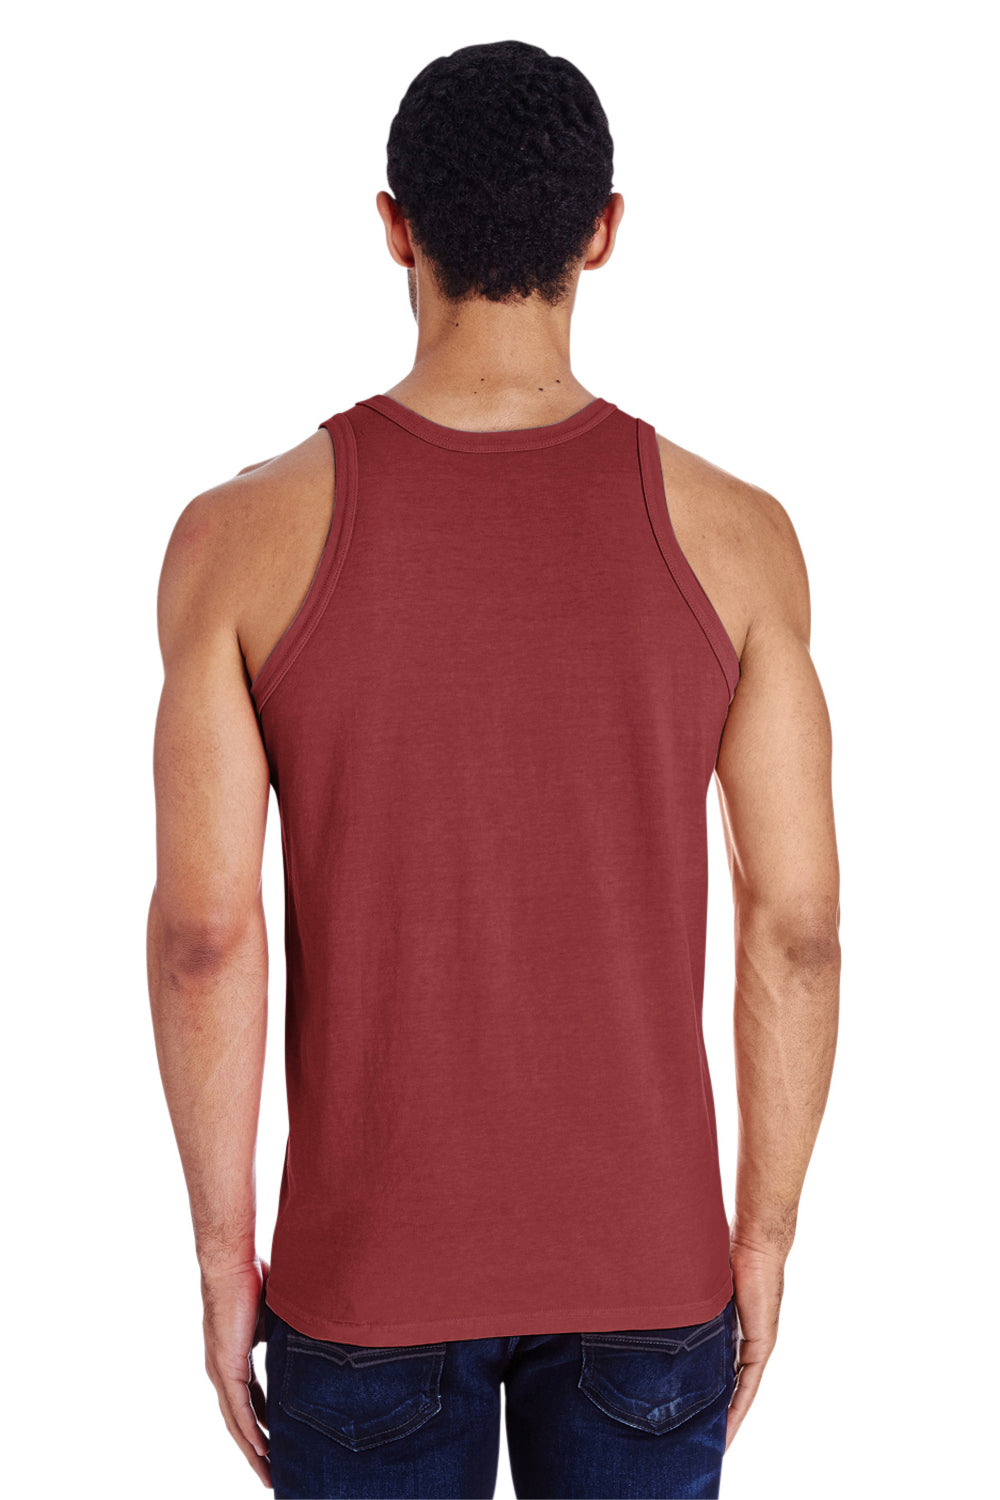 ComfortWash by Hanes GDH300 Tank Top Cayenne Red Back